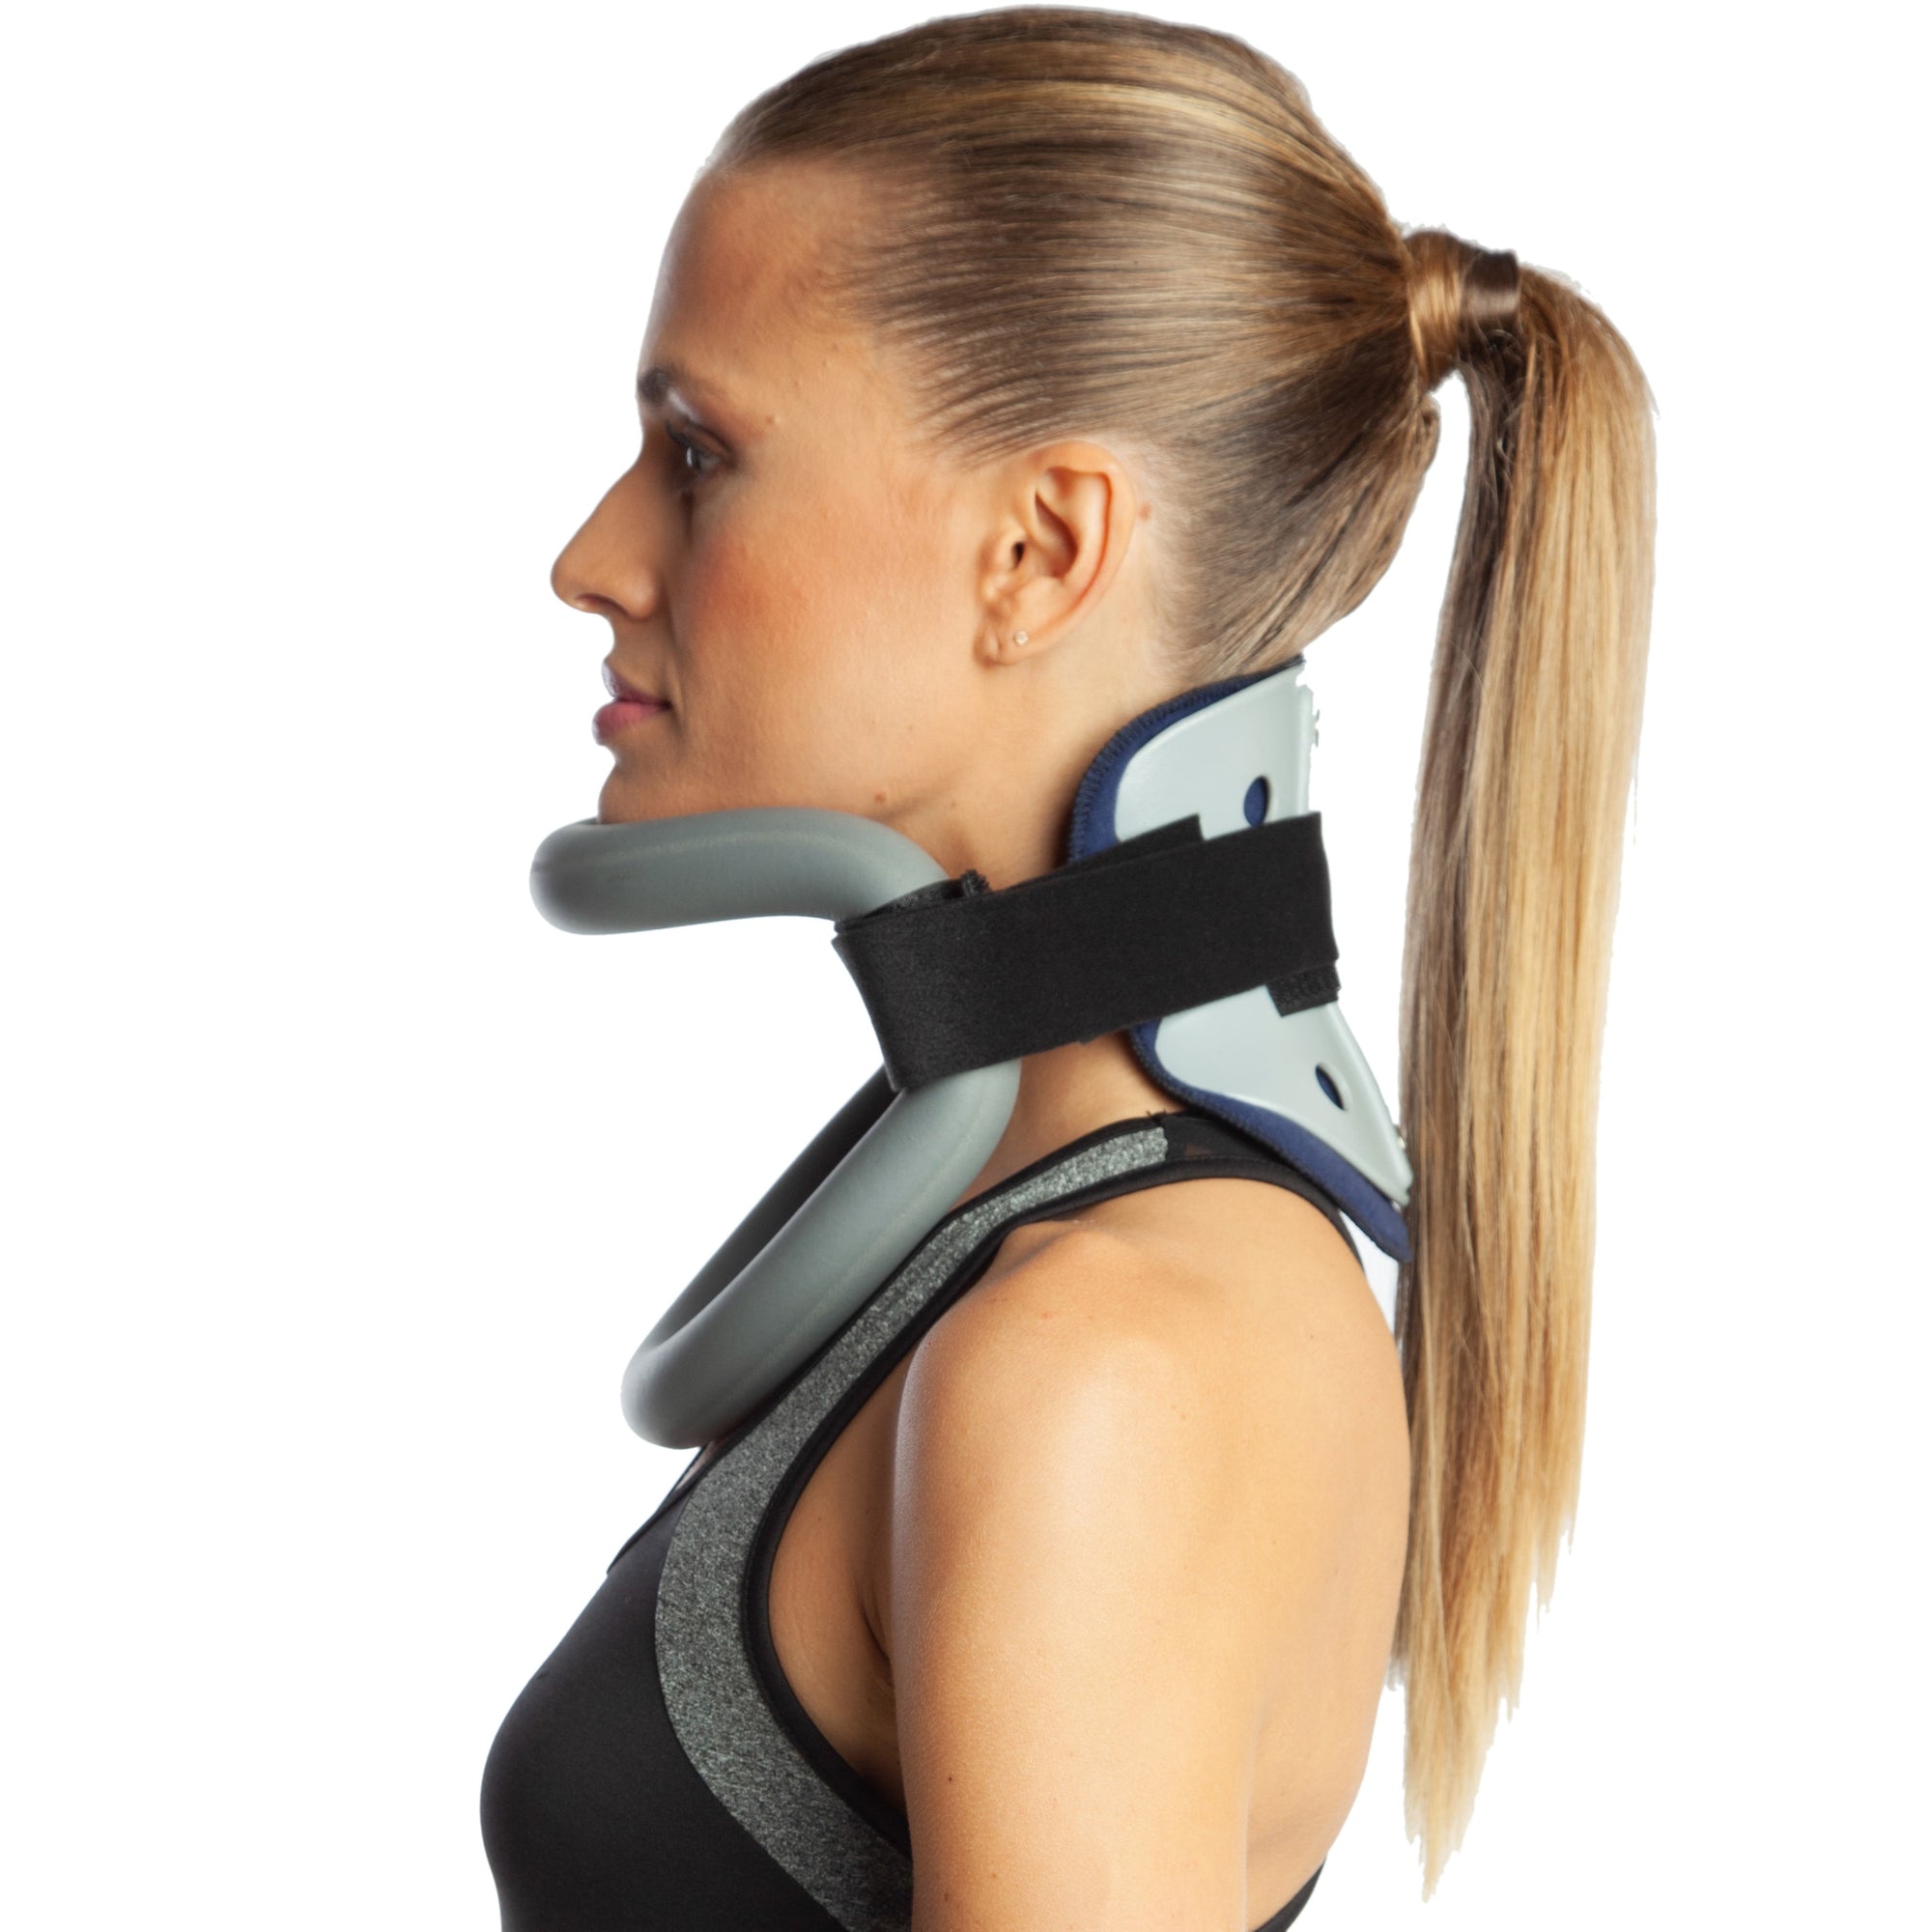 NECK traction device worn by model 